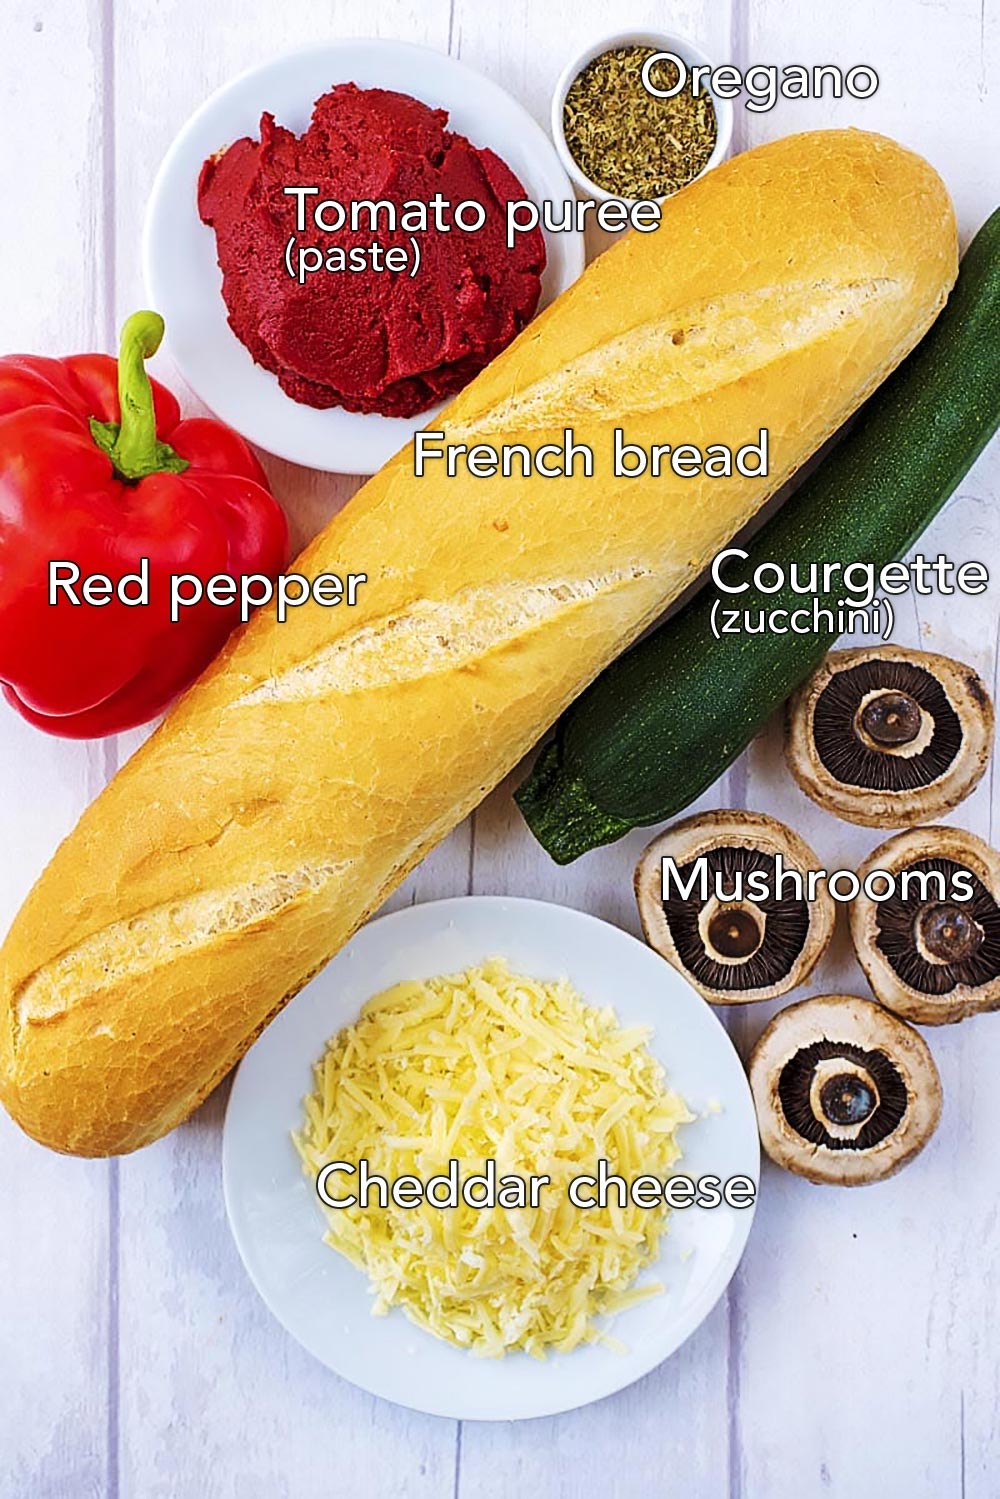 A french baguette, red pepper, mushrooms, courgette, cheese and tomato puree on a wooden surface.